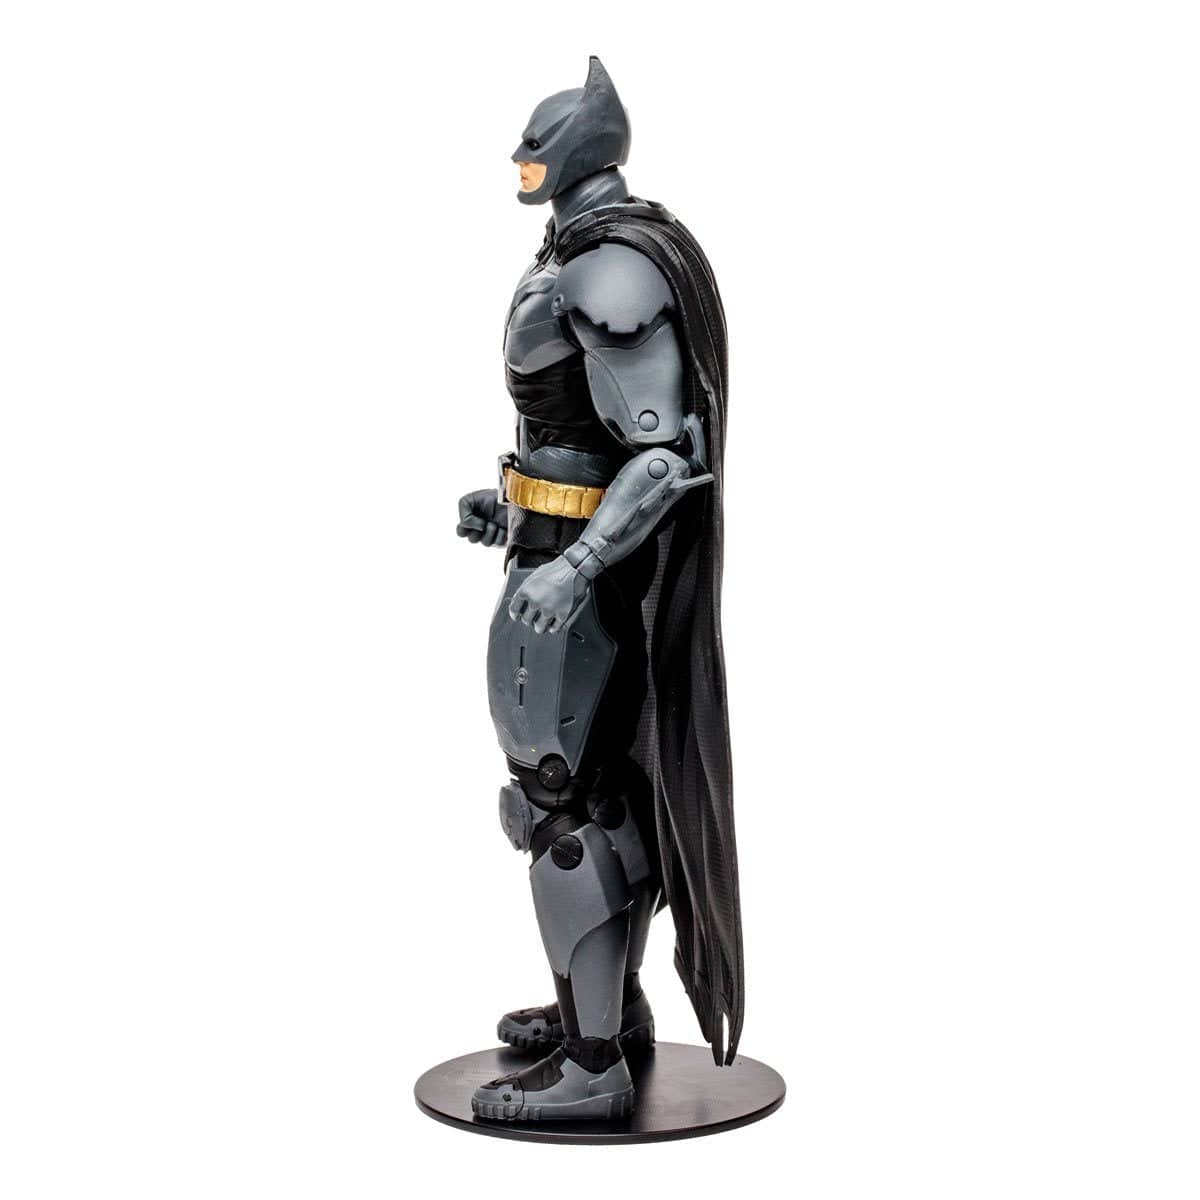 Injustice 2 Batman Page Punchers 7-Inch Scale Action Figure with Injustice Comic Book Left side